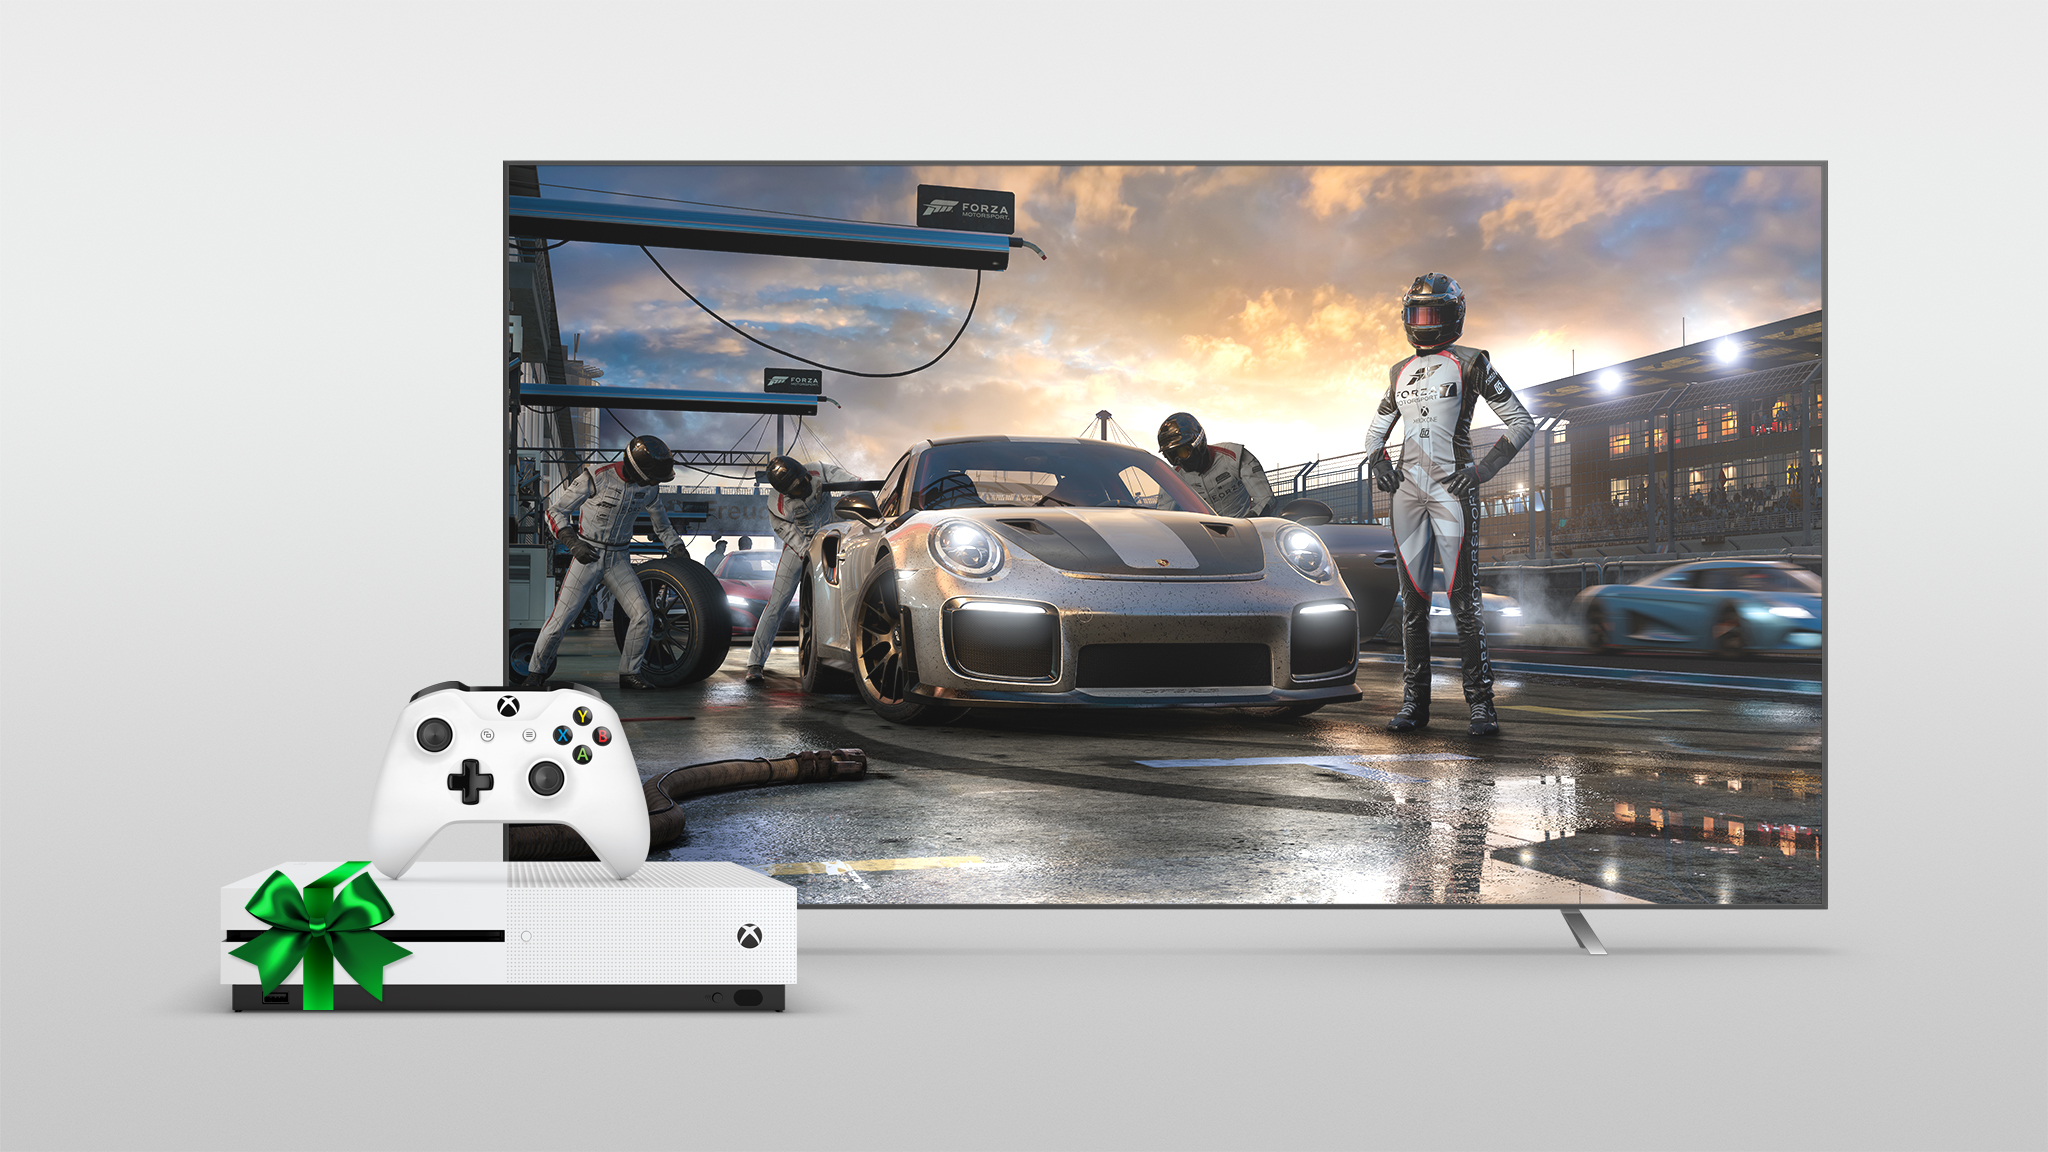 Xbox One S wrapped in a green bow next to a large TV with Forza shown on the screen